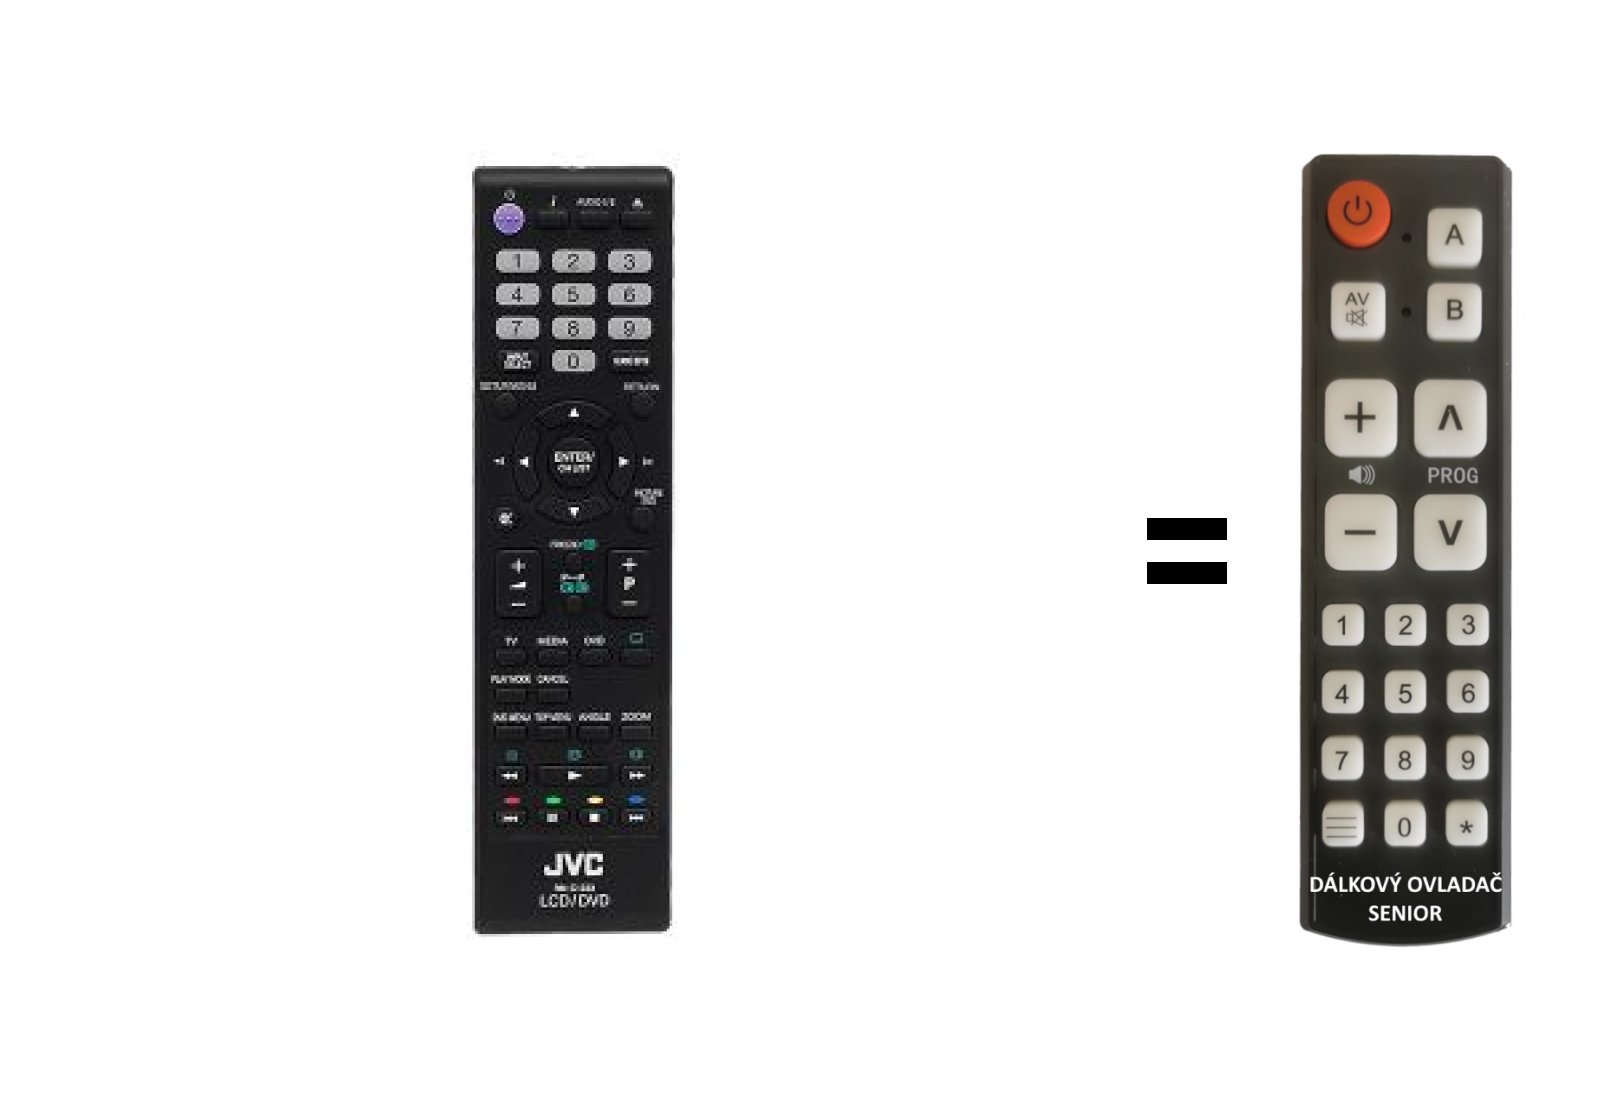 JVC RM-C1233 replacement remote control for seniors